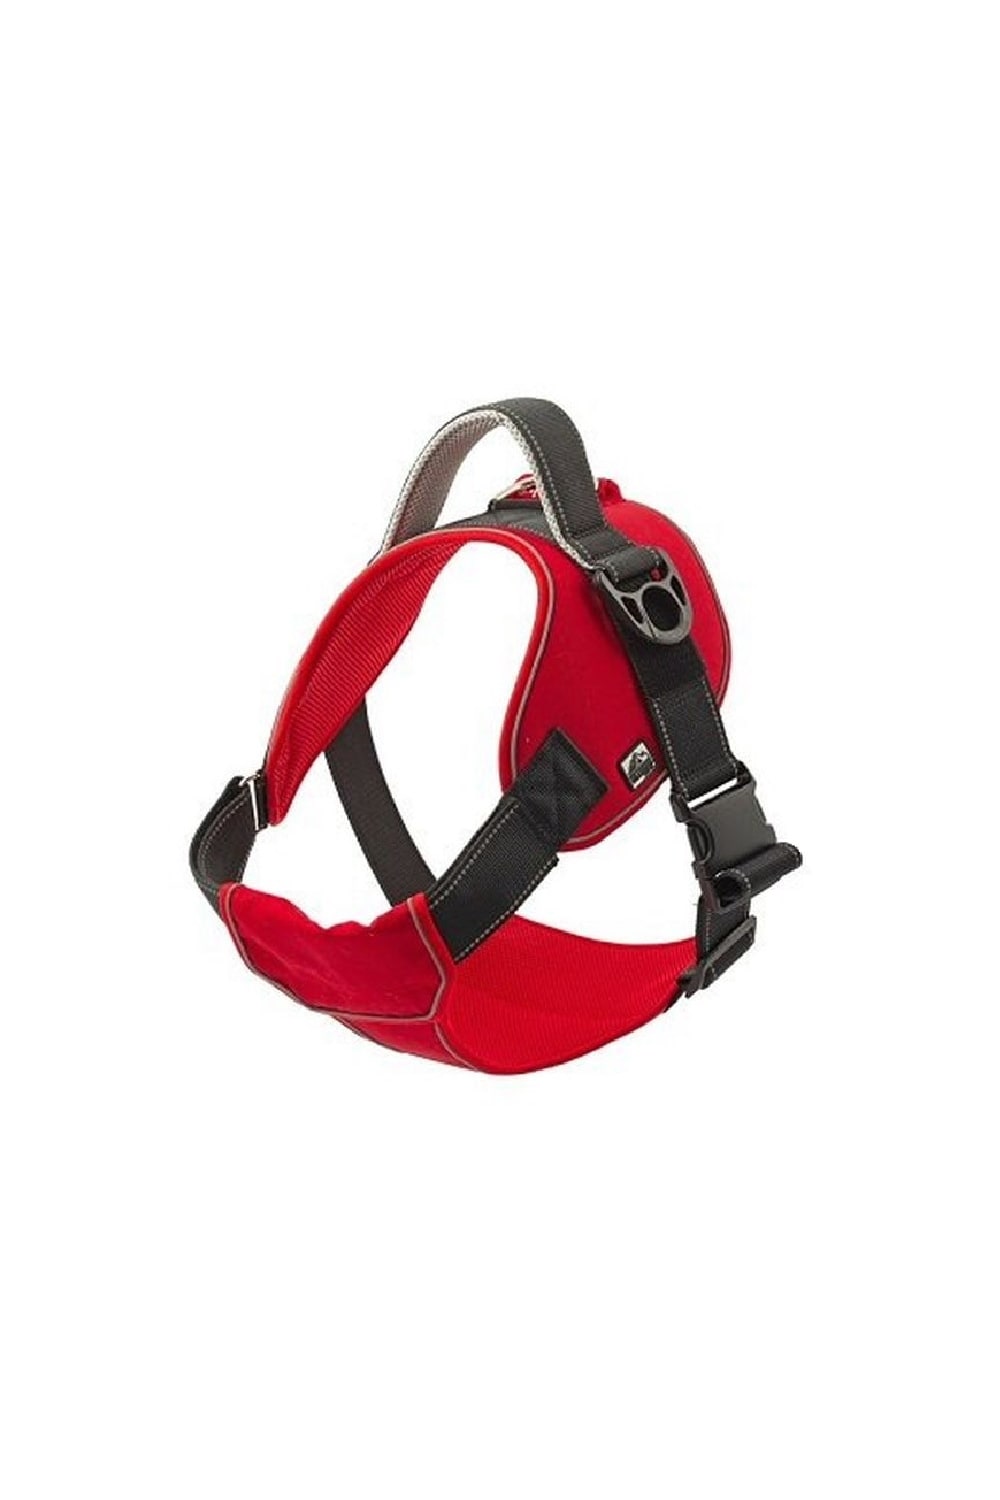 Ancol Extreme Dog Harness (Red) (S)